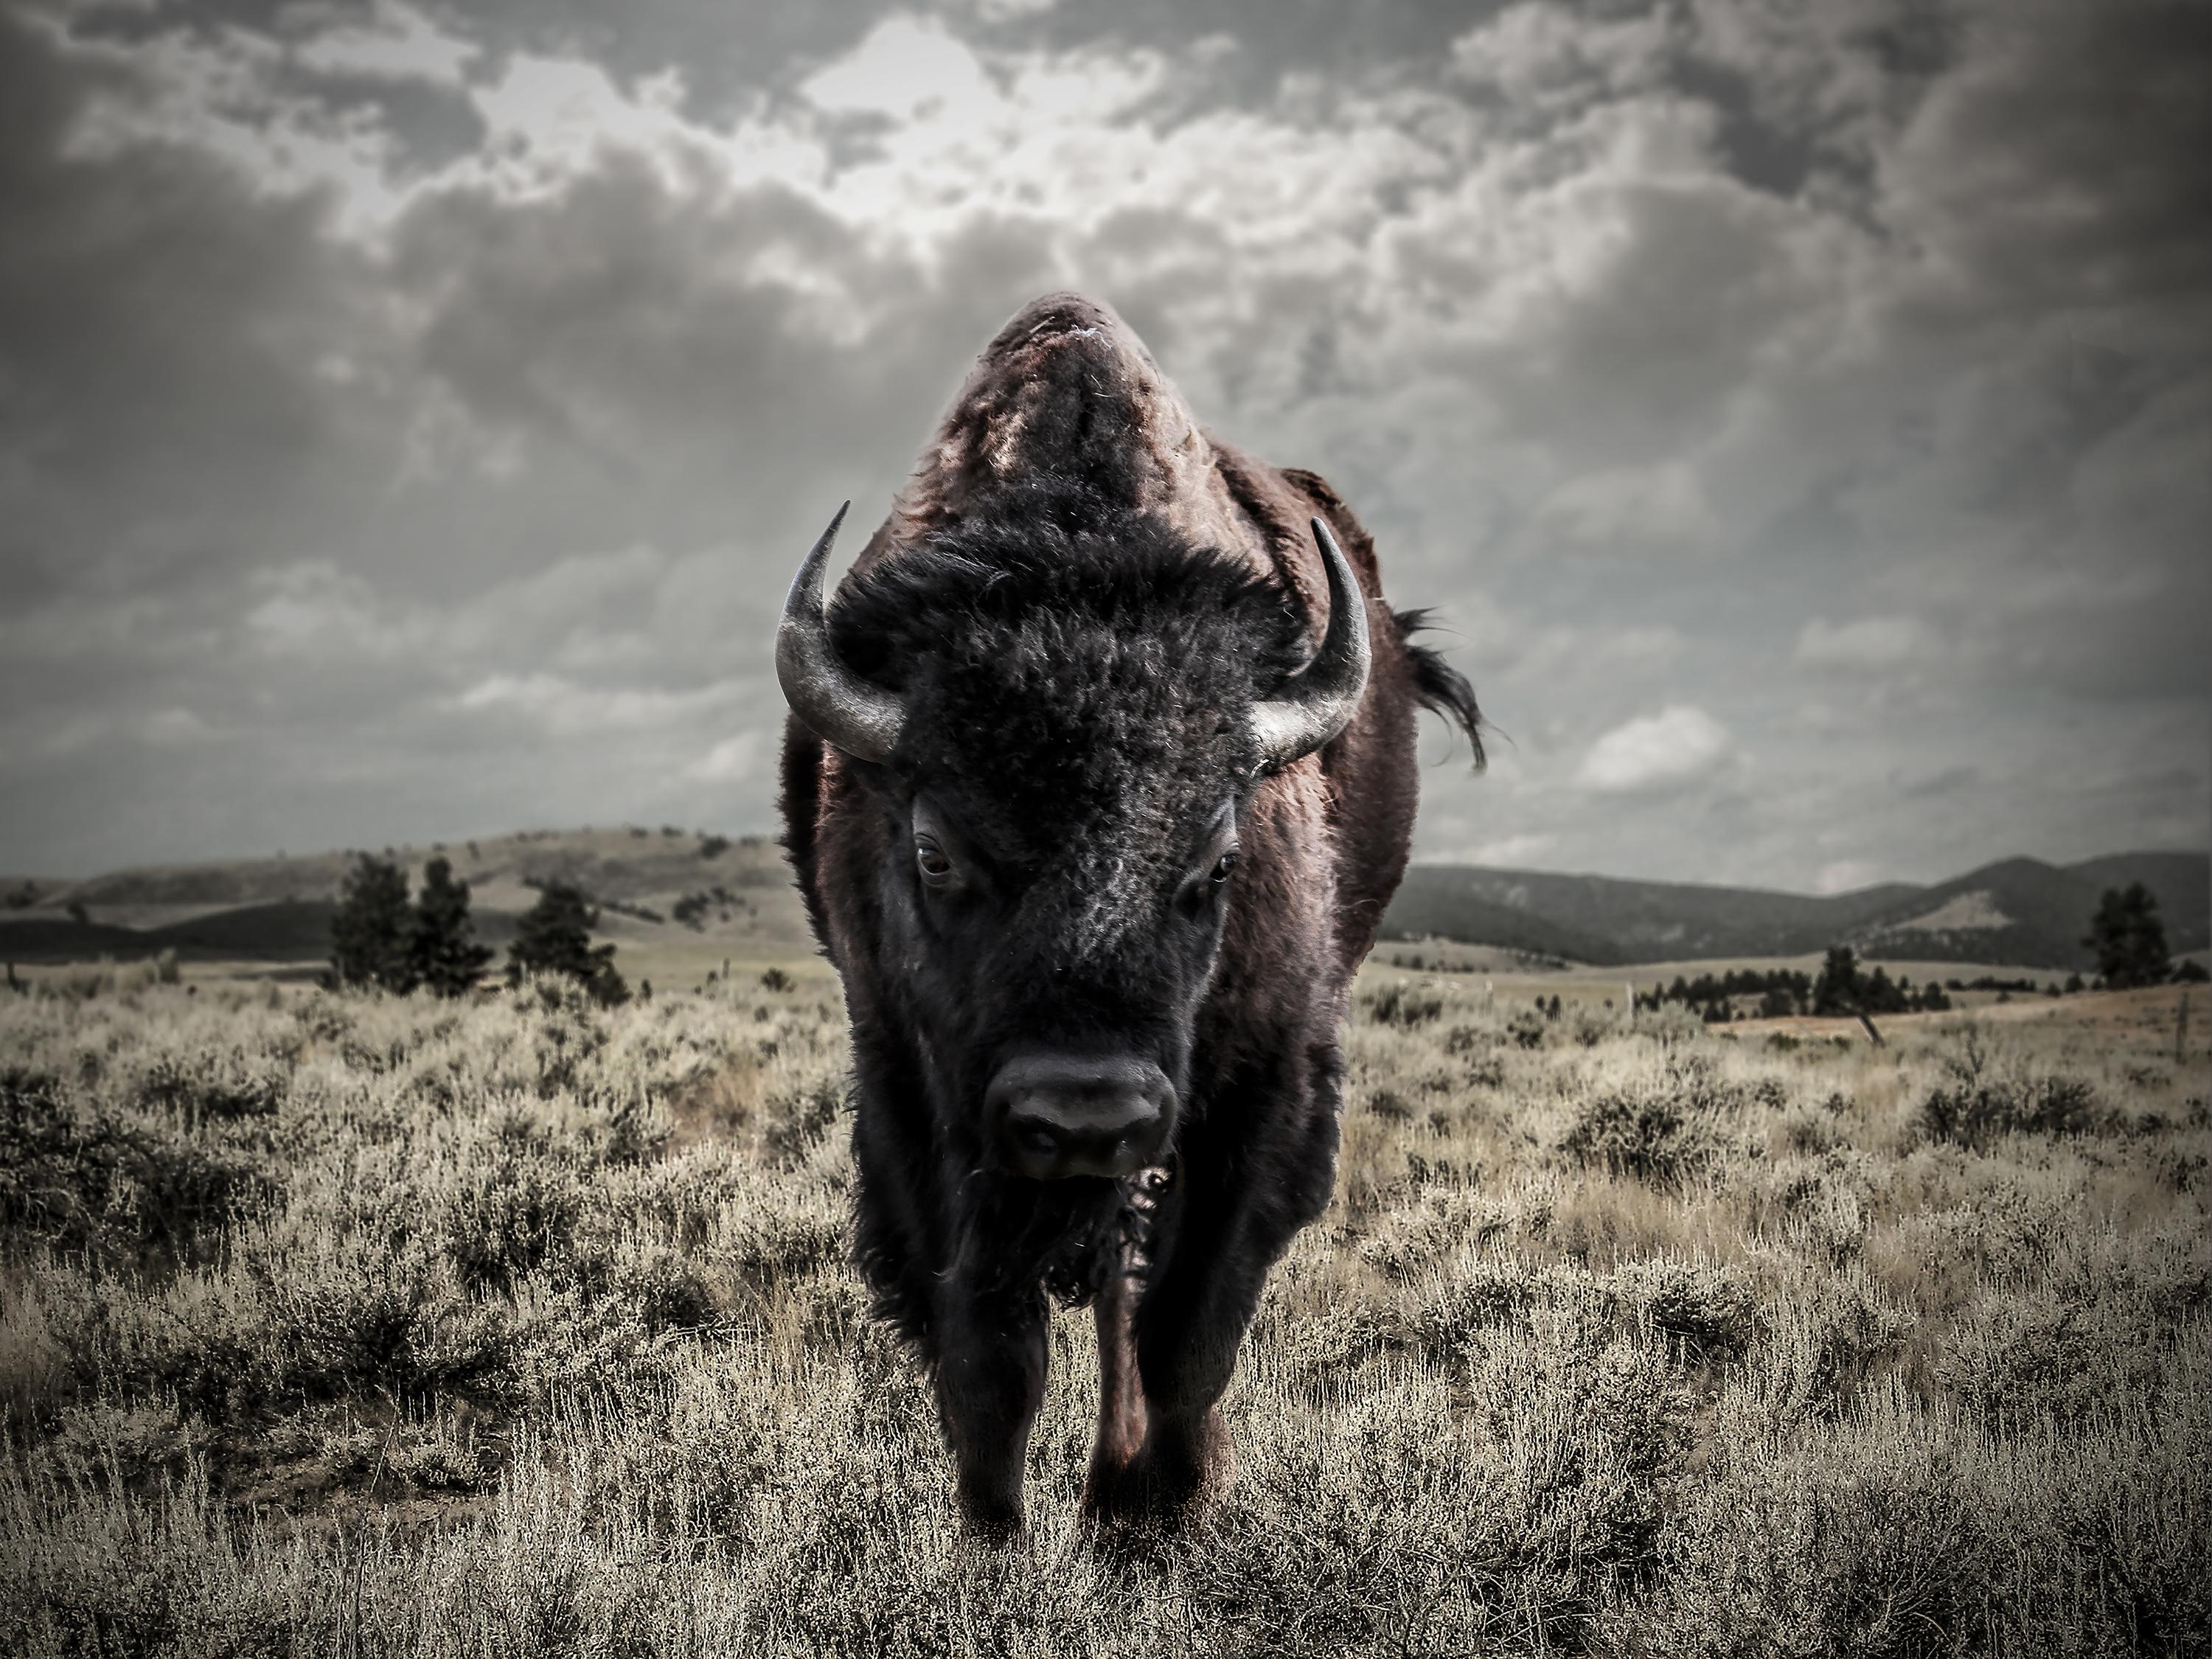 Shane Russeck Black and White Photograph - "Bison" 60x40 -  Photograph, Buffalo, Bison Photography by Unsigned